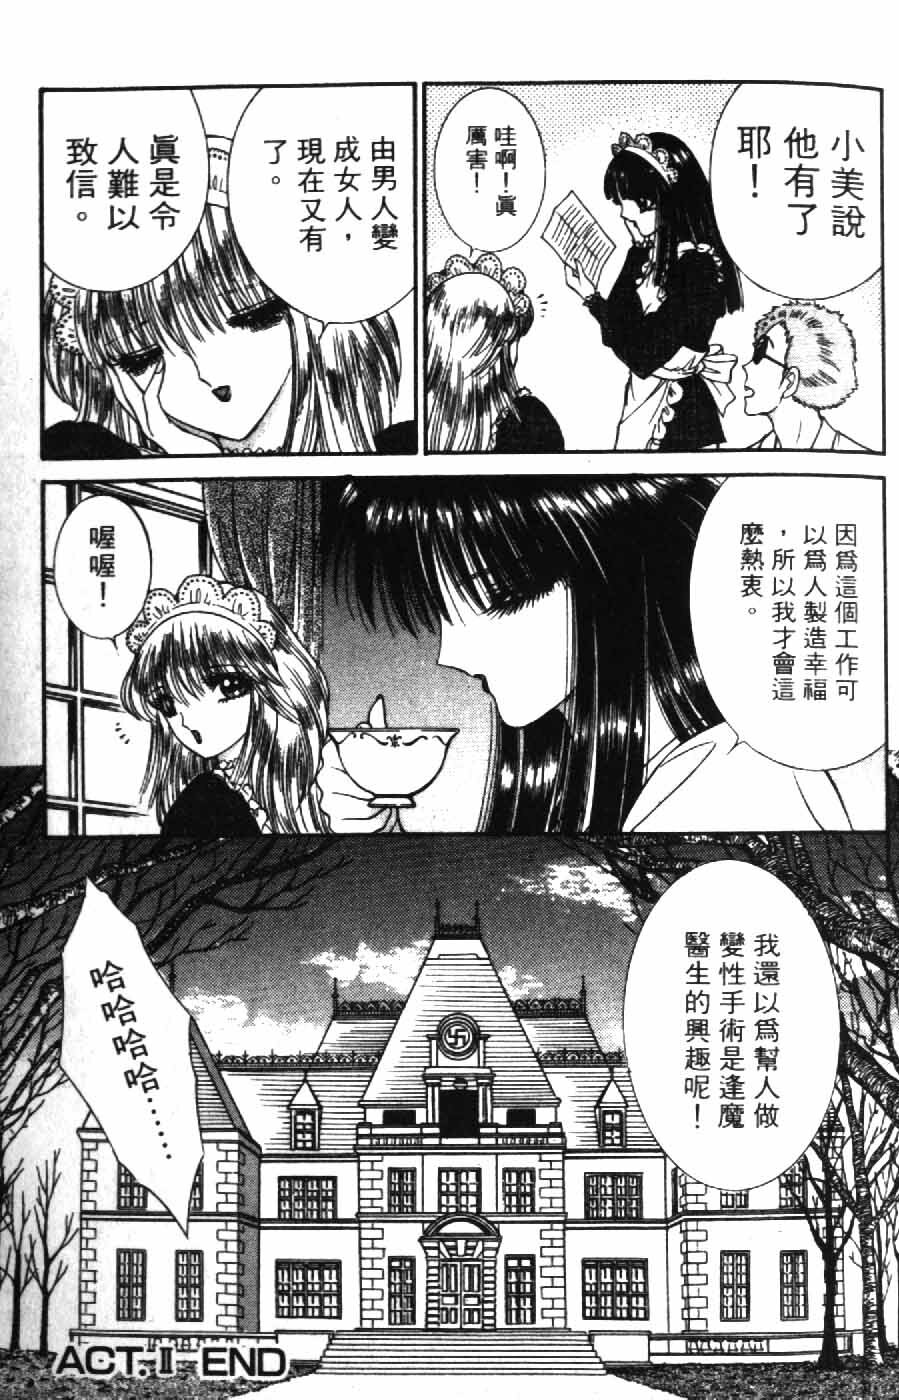 [Senno Knife] Ouma ga Horror Show 2 - Trans Sexual Special Show 2 | 顫慄博覽會 2 [Chinese] page 41 full